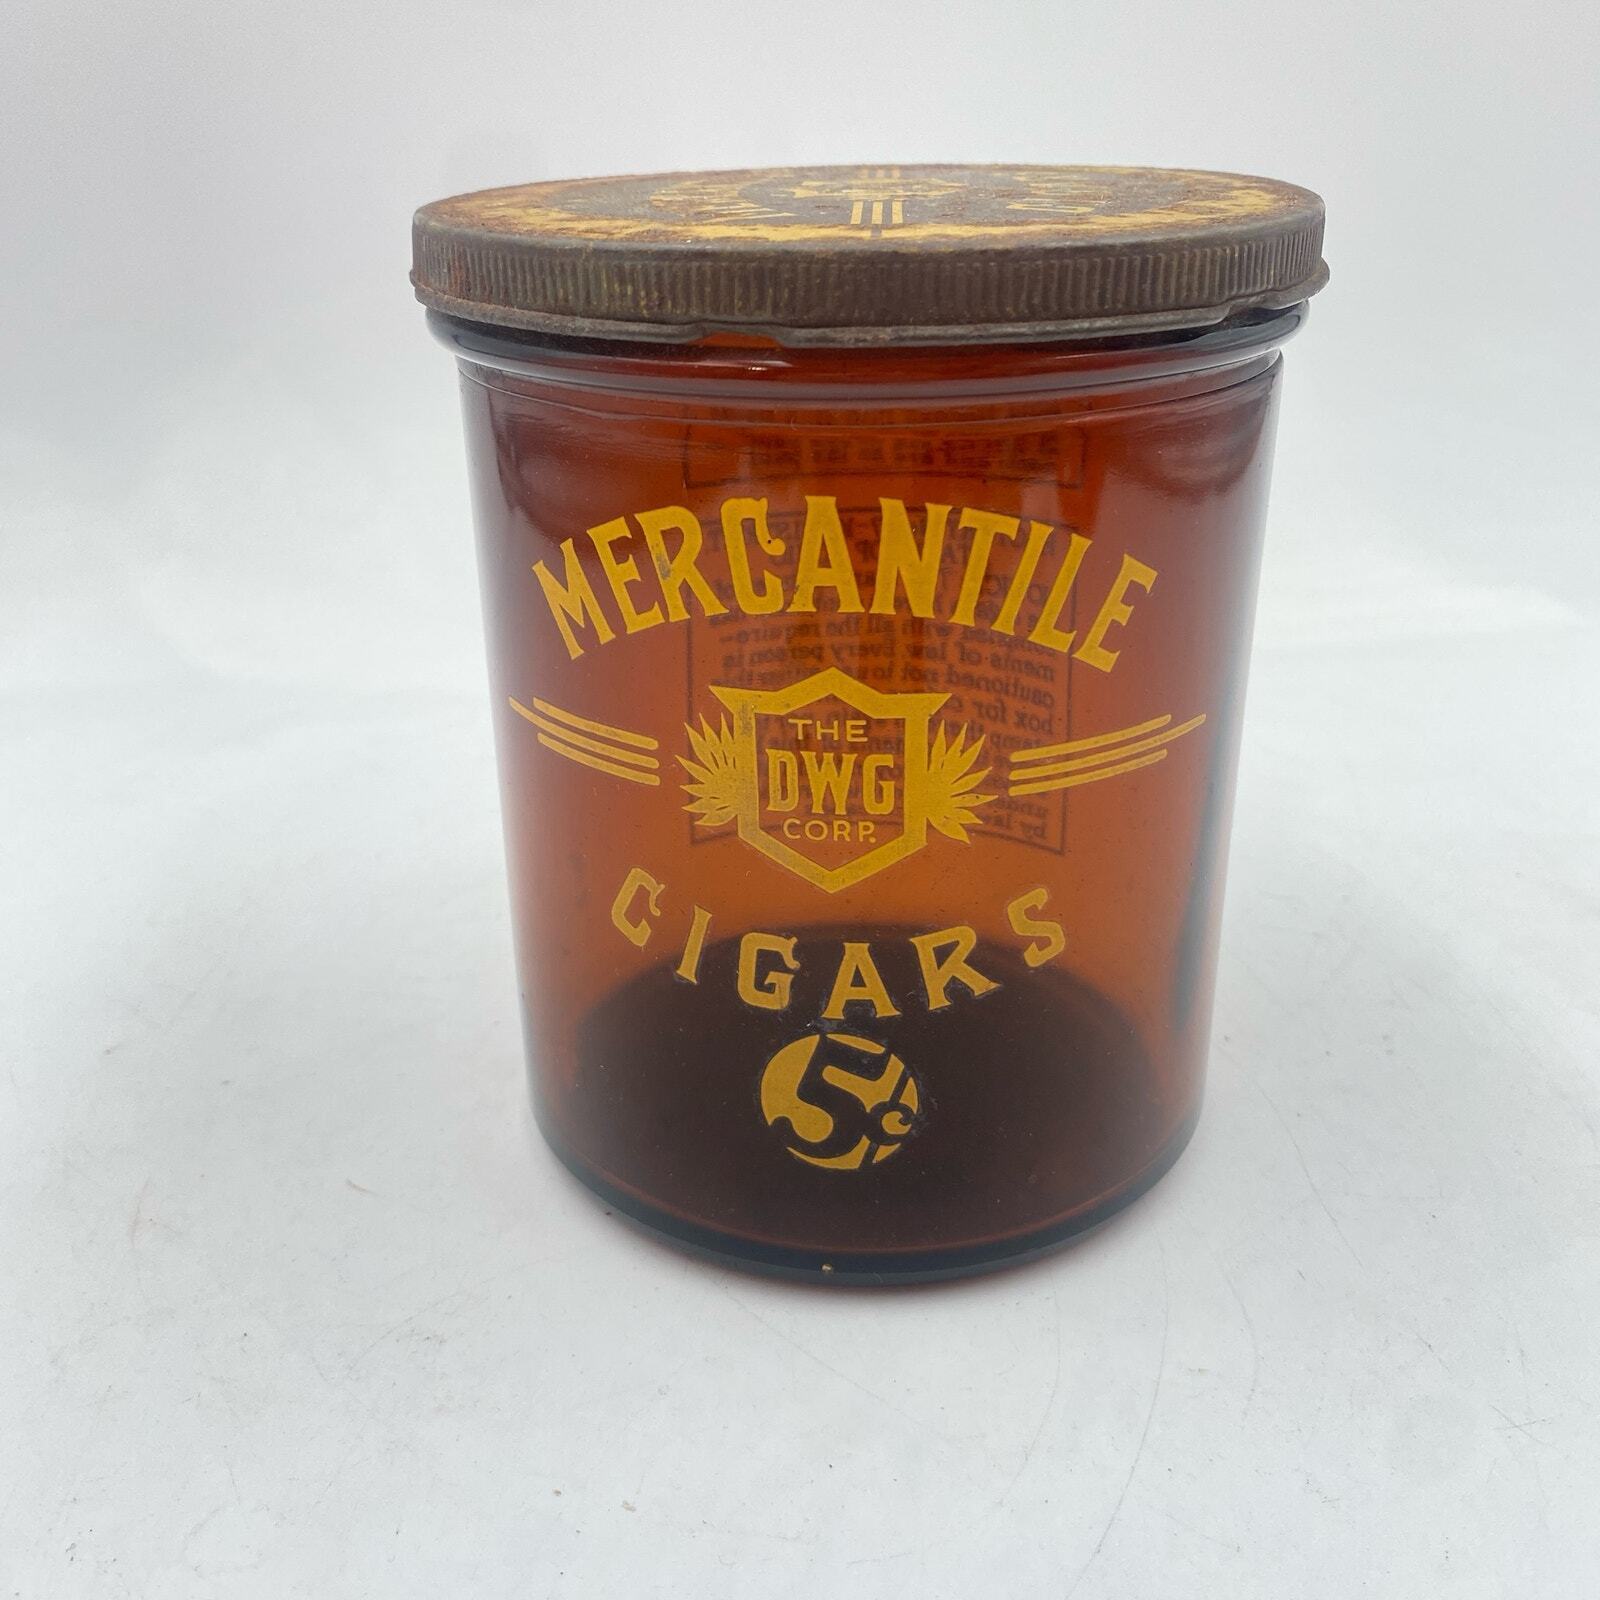 EMPTY Vintage Amber Mercantile Cigars 5 cents The DWG Corp No 77 State of Ohio